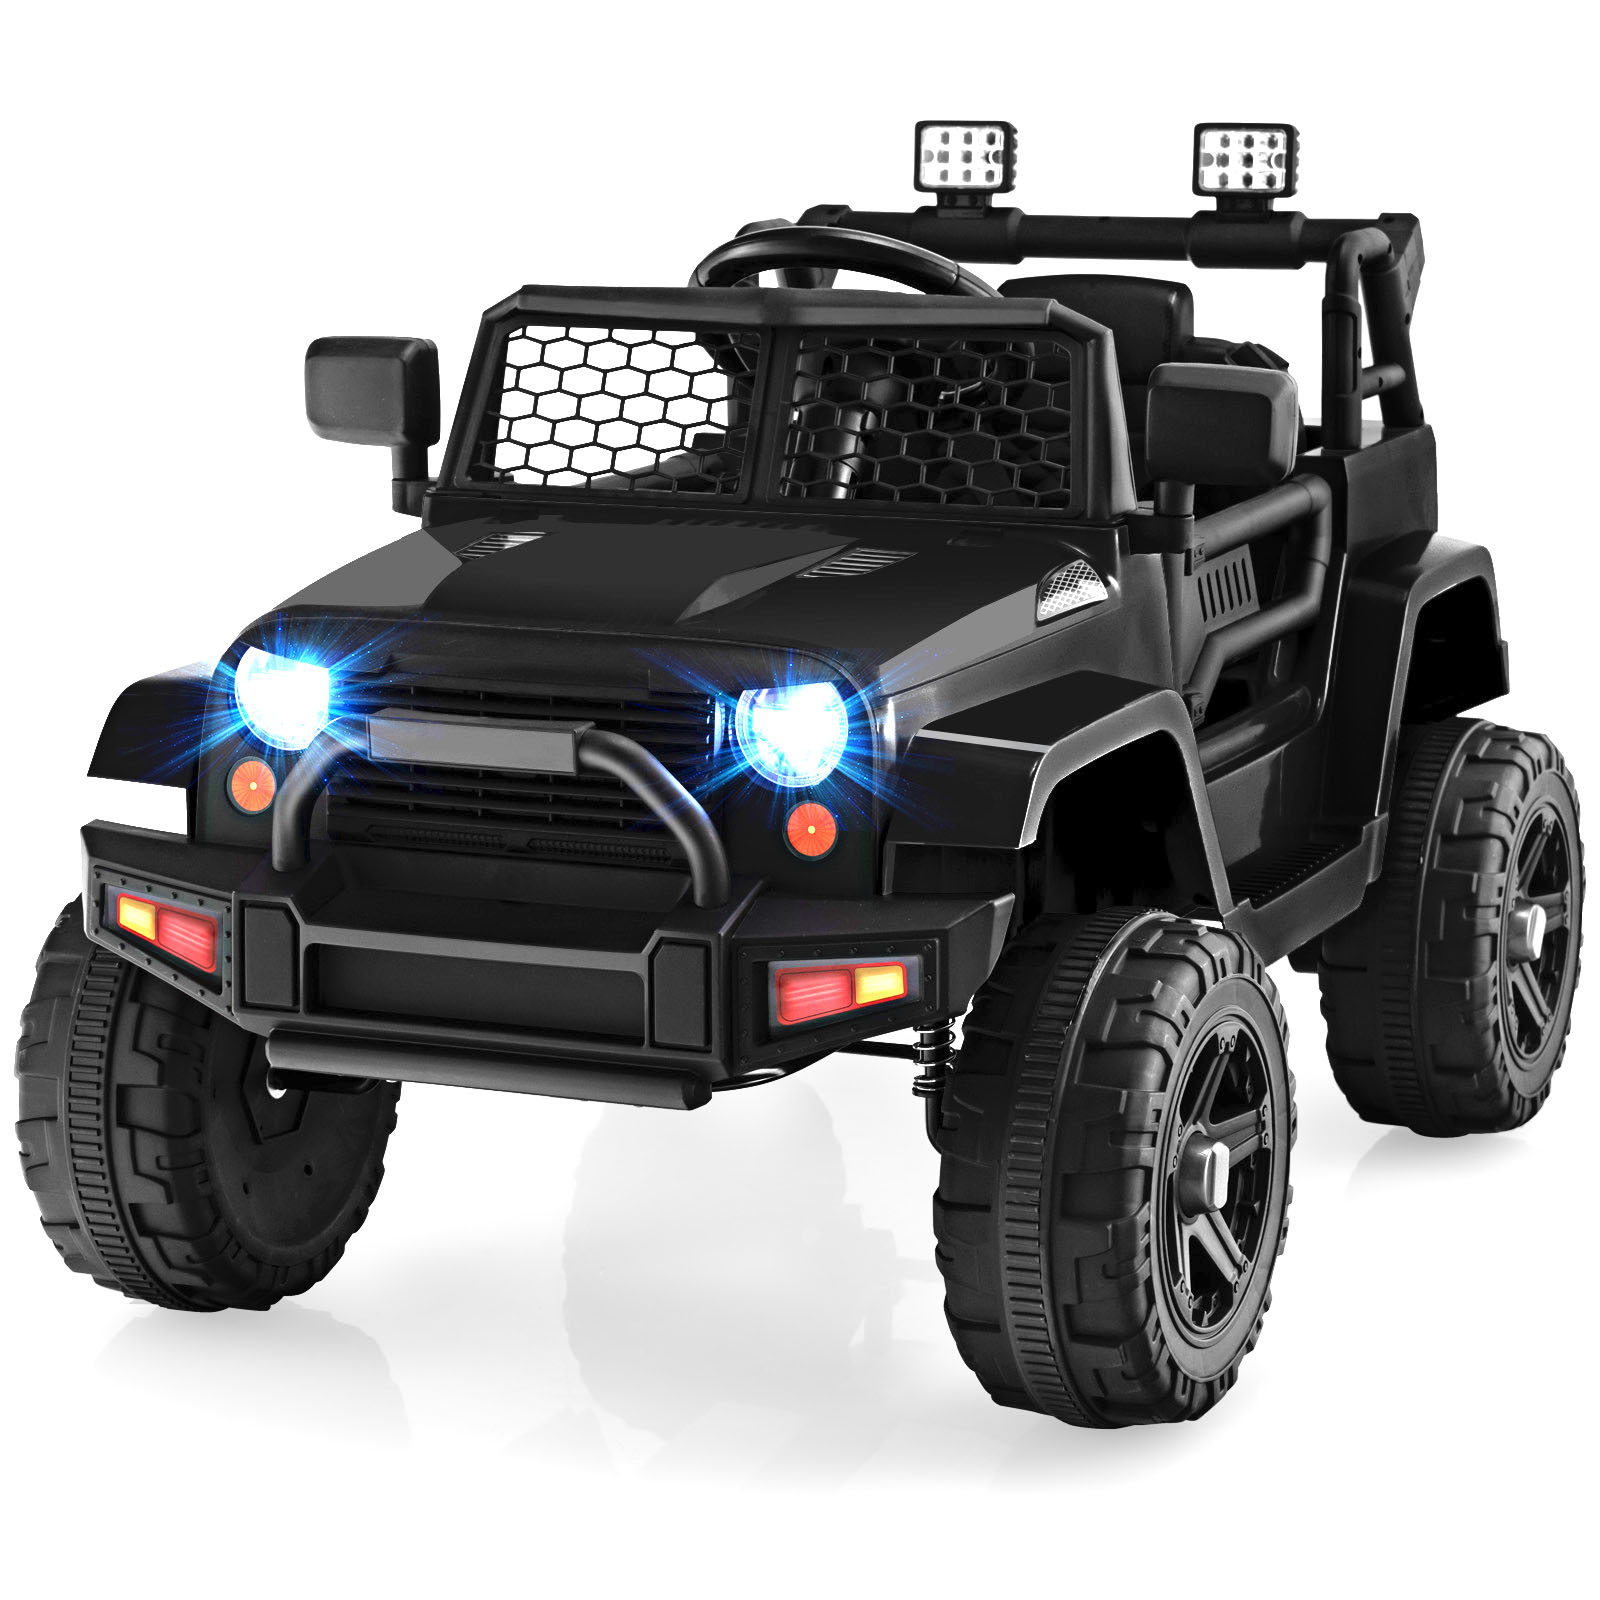 Topbuy 12V Kids Ride On Car Electric Vehicle Jeep with Parental Remote Music Horn Headlights Slow Start Function Black - image 1 of 10